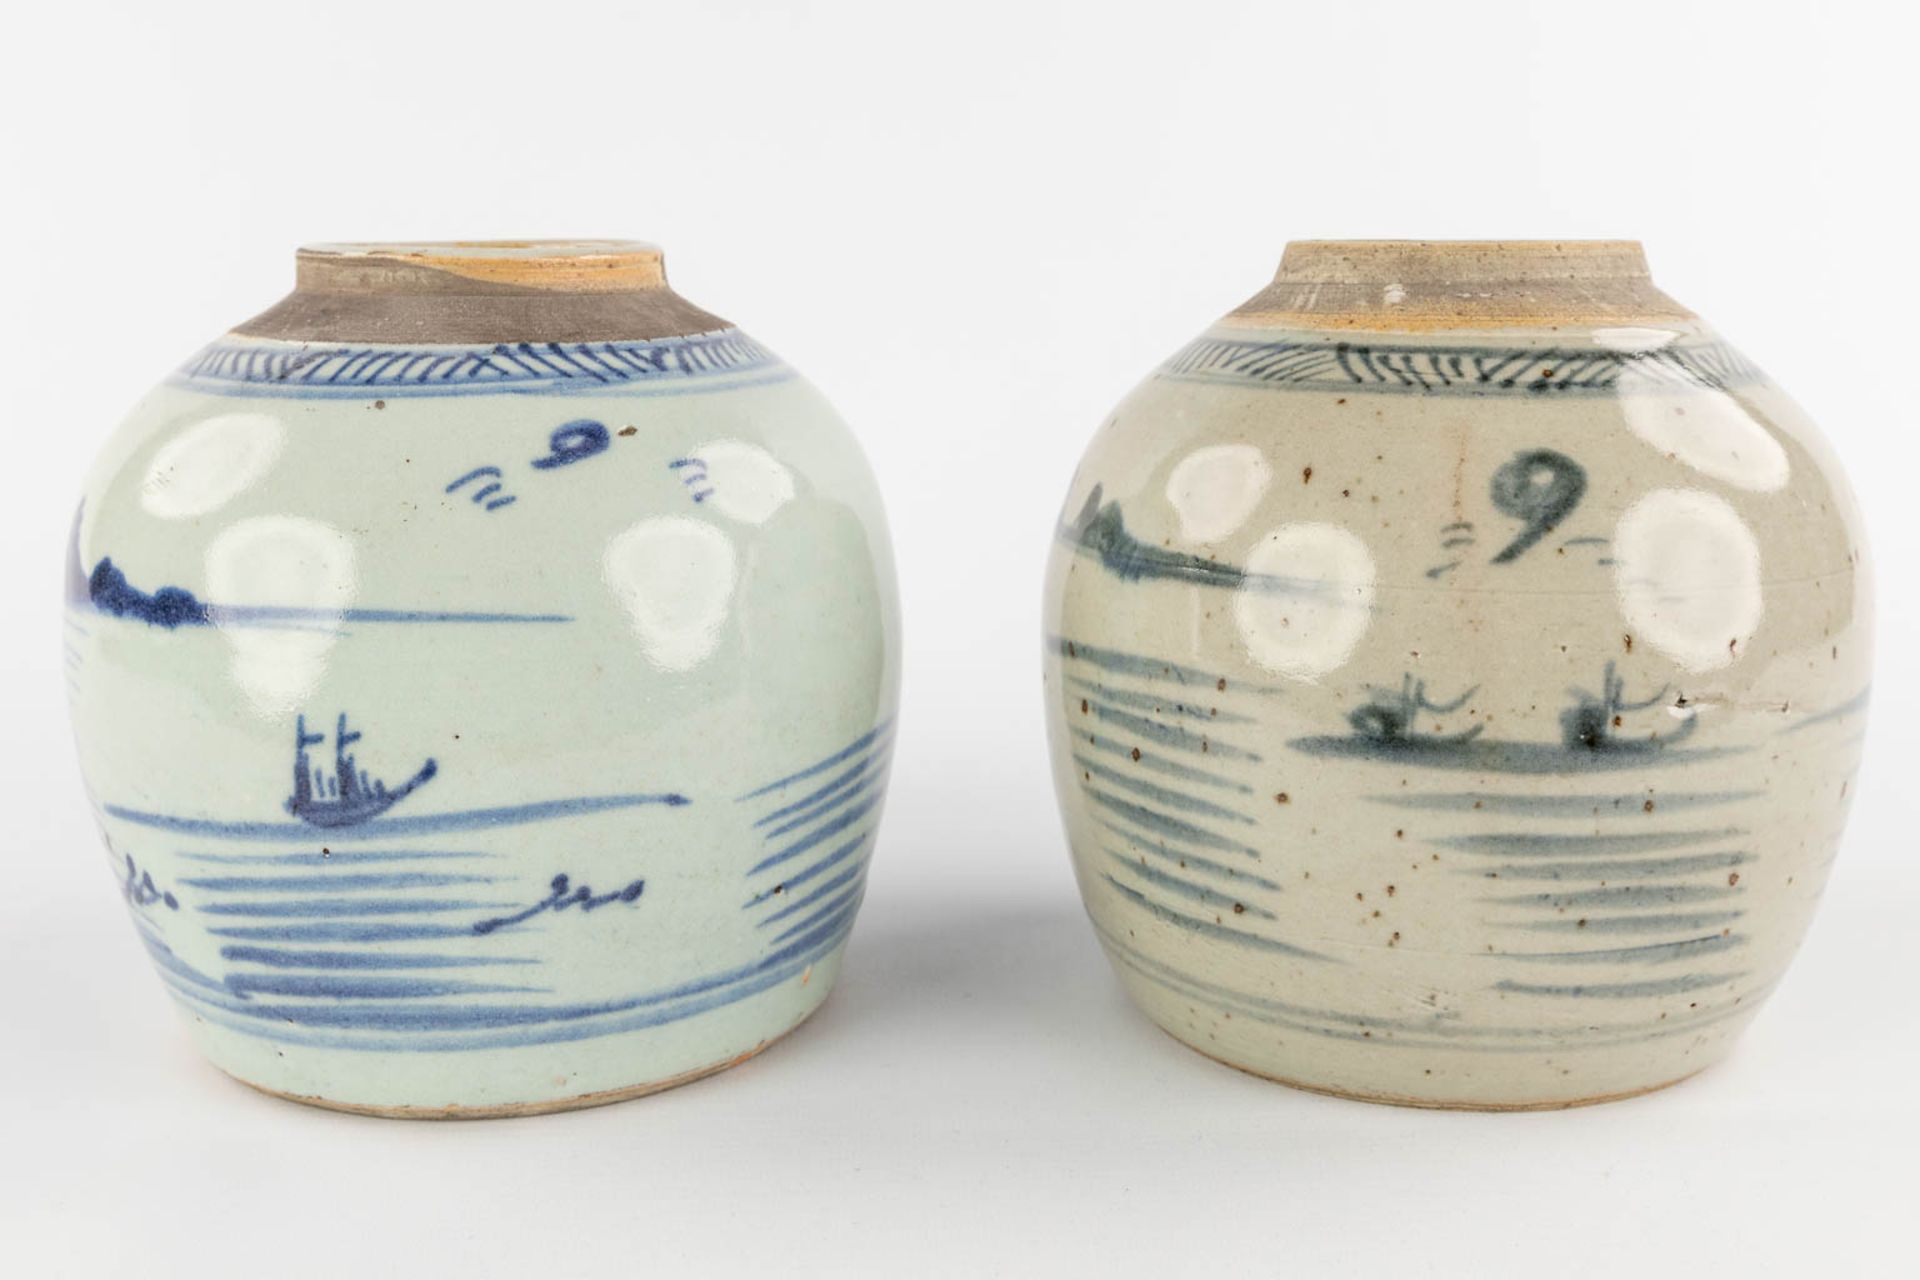 4 Chinese ginger jars with blue-white decor. 19th/20th C. (H:23 x D:21 cm) - Image 11 of 14